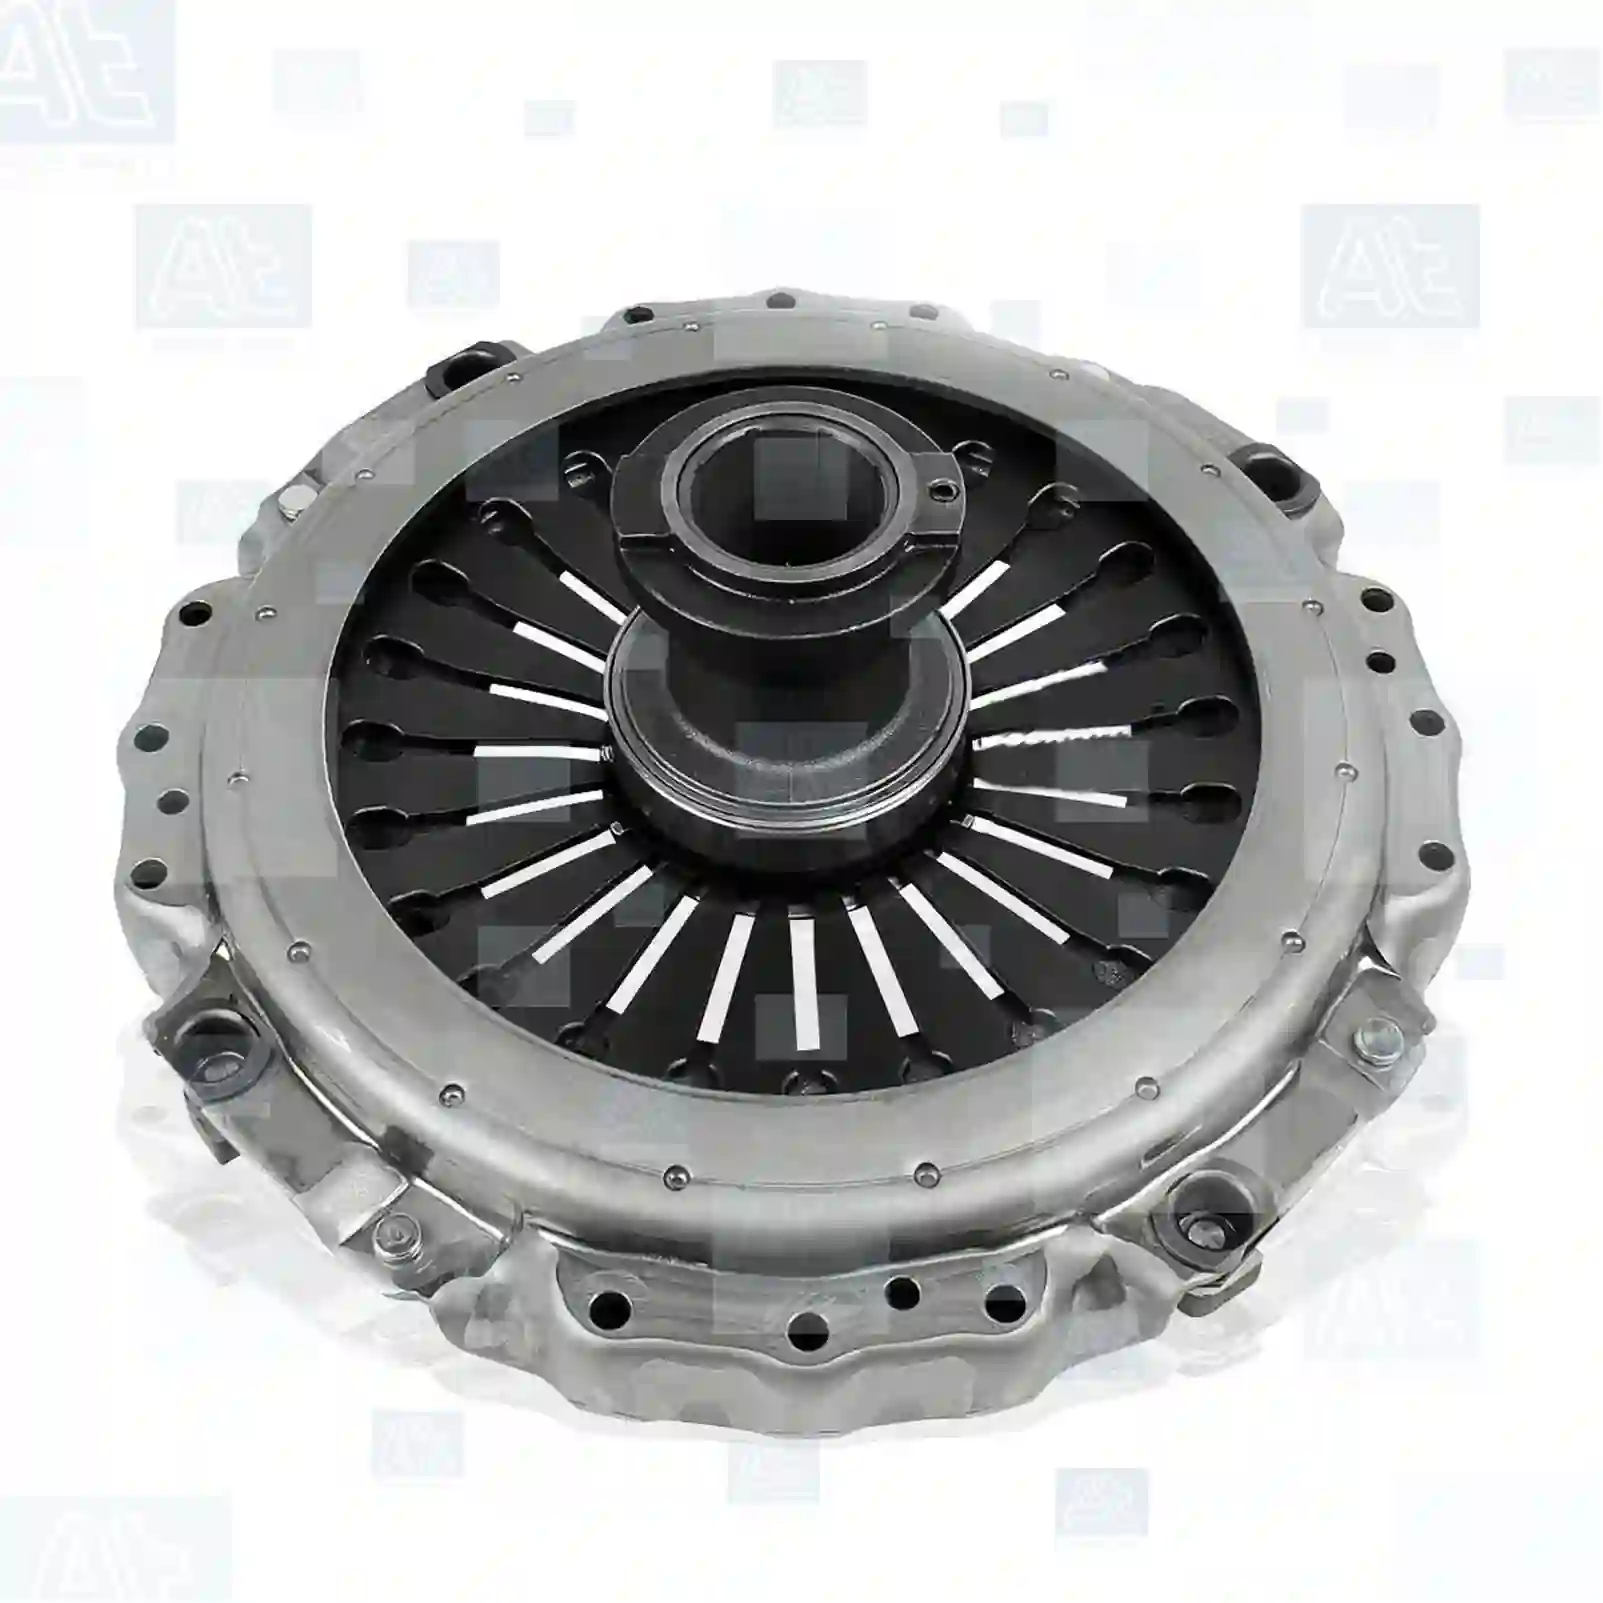 Clutch cover, with release bearing, 77722426, 0052506404, 005250640480, 0052506604, 005250660480, 0052509304, 005250930480, 0052509404, 005250940480, 0072506104, 007250610480, 0072506504, 0072507904, 0072508104, 0072509704, 0082502404, 0082503004, 0082503104, 0082504404, 0092500704, 0092500804, 0092508304, 0102500704, 0102500804, 0102501004, 0212504001, 0212504101, 0222502001, 0222505501, 0242500101, 0242500201, 0242500401, 0242507401, 0262504701, 0262506601, 442999513000 ||  77722426 At Spare Part | Engine, Accelerator Pedal, Camshaft, Connecting Rod, Crankcase, Crankshaft, Cylinder Head, Engine Suspension Mountings, Exhaust Manifold, Exhaust Gas Recirculation, Filter Kits, Flywheel Housing, General Overhaul Kits, Engine, Intake Manifold, Oil Cleaner, Oil Cooler, Oil Filter, Oil Pump, Oil Sump, Piston & Liner, Sensor & Switch, Timing Case, Turbocharger, Cooling System, Belt Tensioner, Coolant Filter, Coolant Pipe, Corrosion Prevention Agent, Drive, Expansion Tank, Fan, Intercooler, Monitors & Gauges, Radiator, Thermostat, V-Belt / Timing belt, Water Pump, Fuel System, Electronical Injector Unit, Feed Pump, Fuel Filter, cpl., Fuel Gauge Sender,  Fuel Line, Fuel Pump, Fuel Tank, Injection Line Kit, Injection Pump, Exhaust System, Clutch & Pedal, Gearbox, Propeller Shaft, Axles, Brake System, Hubs & Wheels, Suspension, Leaf Spring, Universal Parts / Accessories, Steering, Electrical System, Cabin Clutch cover, with release bearing, 77722426, 0052506404, 005250640480, 0052506604, 005250660480, 0052509304, 005250930480, 0052509404, 005250940480, 0072506104, 007250610480, 0072506504, 0072507904, 0072508104, 0072509704, 0082502404, 0082503004, 0082503104, 0082504404, 0092500704, 0092500804, 0092508304, 0102500704, 0102500804, 0102501004, 0212504001, 0212504101, 0222502001, 0222505501, 0242500101, 0242500201, 0242500401, 0242507401, 0262504701, 0262506601, 442999513000 ||  77722426 At Spare Part | Engine, Accelerator Pedal, Camshaft, Connecting Rod, Crankcase, Crankshaft, Cylinder Head, Engine Suspension Mountings, Exhaust Manifold, Exhaust Gas Recirculation, Filter Kits, Flywheel Housing, General Overhaul Kits, Engine, Intake Manifold, Oil Cleaner, Oil Cooler, Oil Filter, Oil Pump, Oil Sump, Piston & Liner, Sensor & Switch, Timing Case, Turbocharger, Cooling System, Belt Tensioner, Coolant Filter, Coolant Pipe, Corrosion Prevention Agent, Drive, Expansion Tank, Fan, Intercooler, Monitors & Gauges, Radiator, Thermostat, V-Belt / Timing belt, Water Pump, Fuel System, Electronical Injector Unit, Feed Pump, Fuel Filter, cpl., Fuel Gauge Sender,  Fuel Line, Fuel Pump, Fuel Tank, Injection Line Kit, Injection Pump, Exhaust System, Clutch & Pedal, Gearbox, Propeller Shaft, Axles, Brake System, Hubs & Wheels, Suspension, Leaf Spring, Universal Parts / Accessories, Steering, Electrical System, Cabin